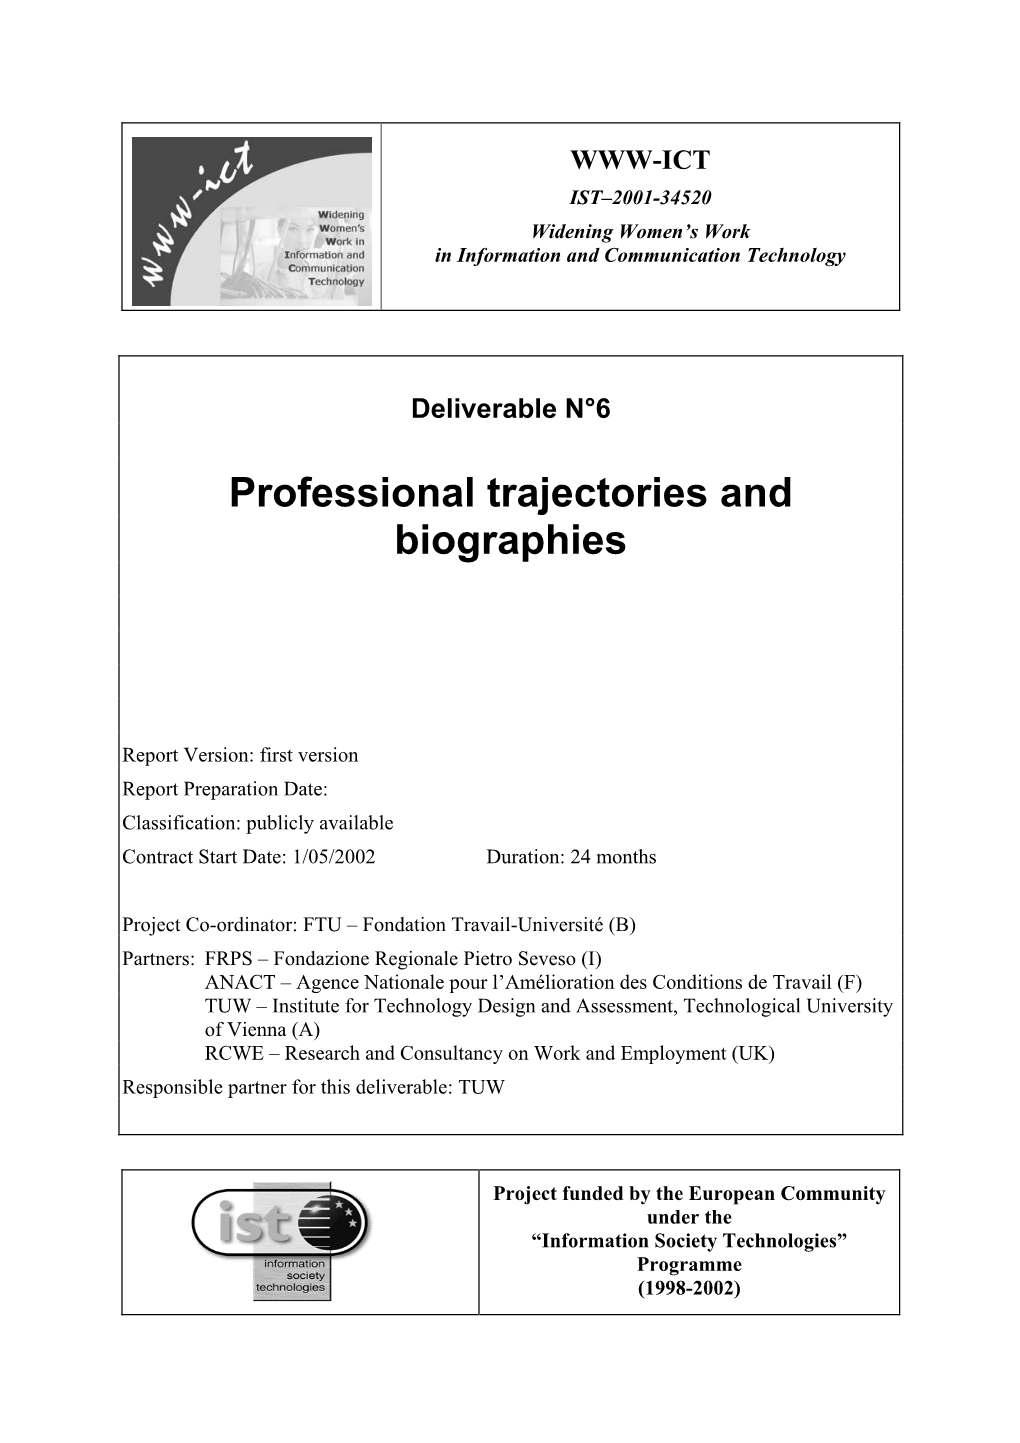 Professional Trajectories and Biographies